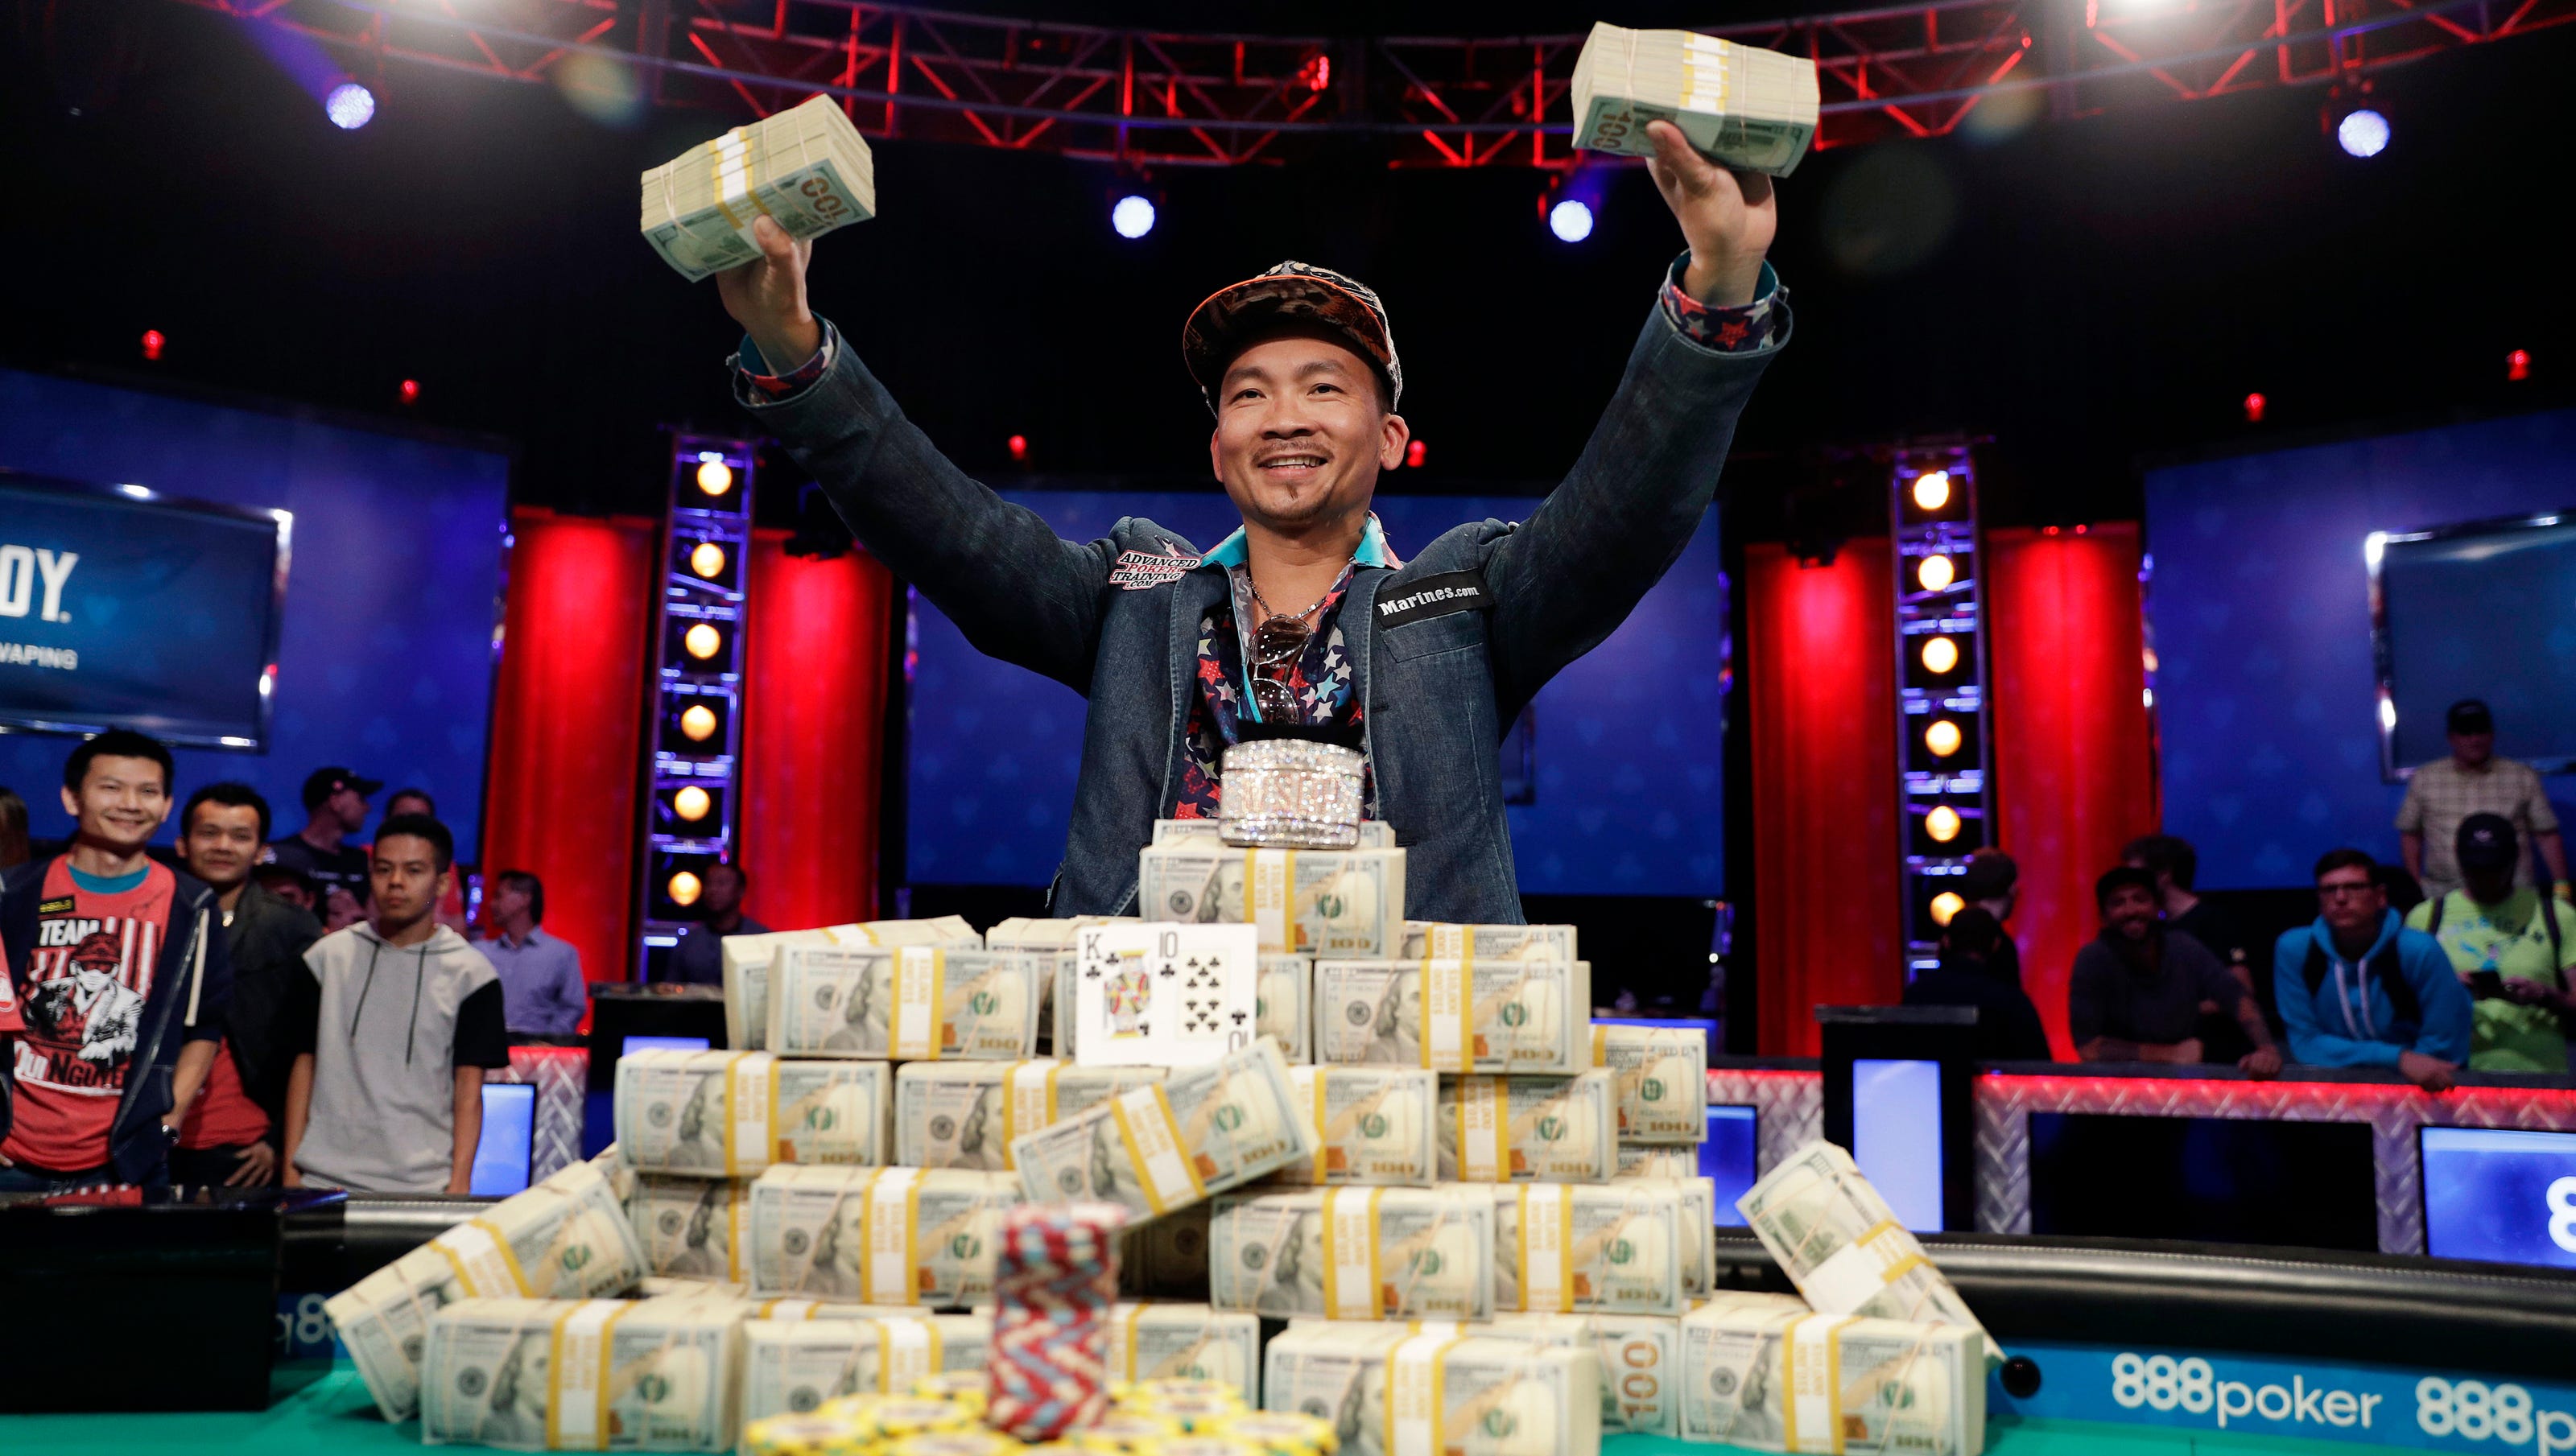 World Series of Poker Qui Nguyen wins final table, takes home 8